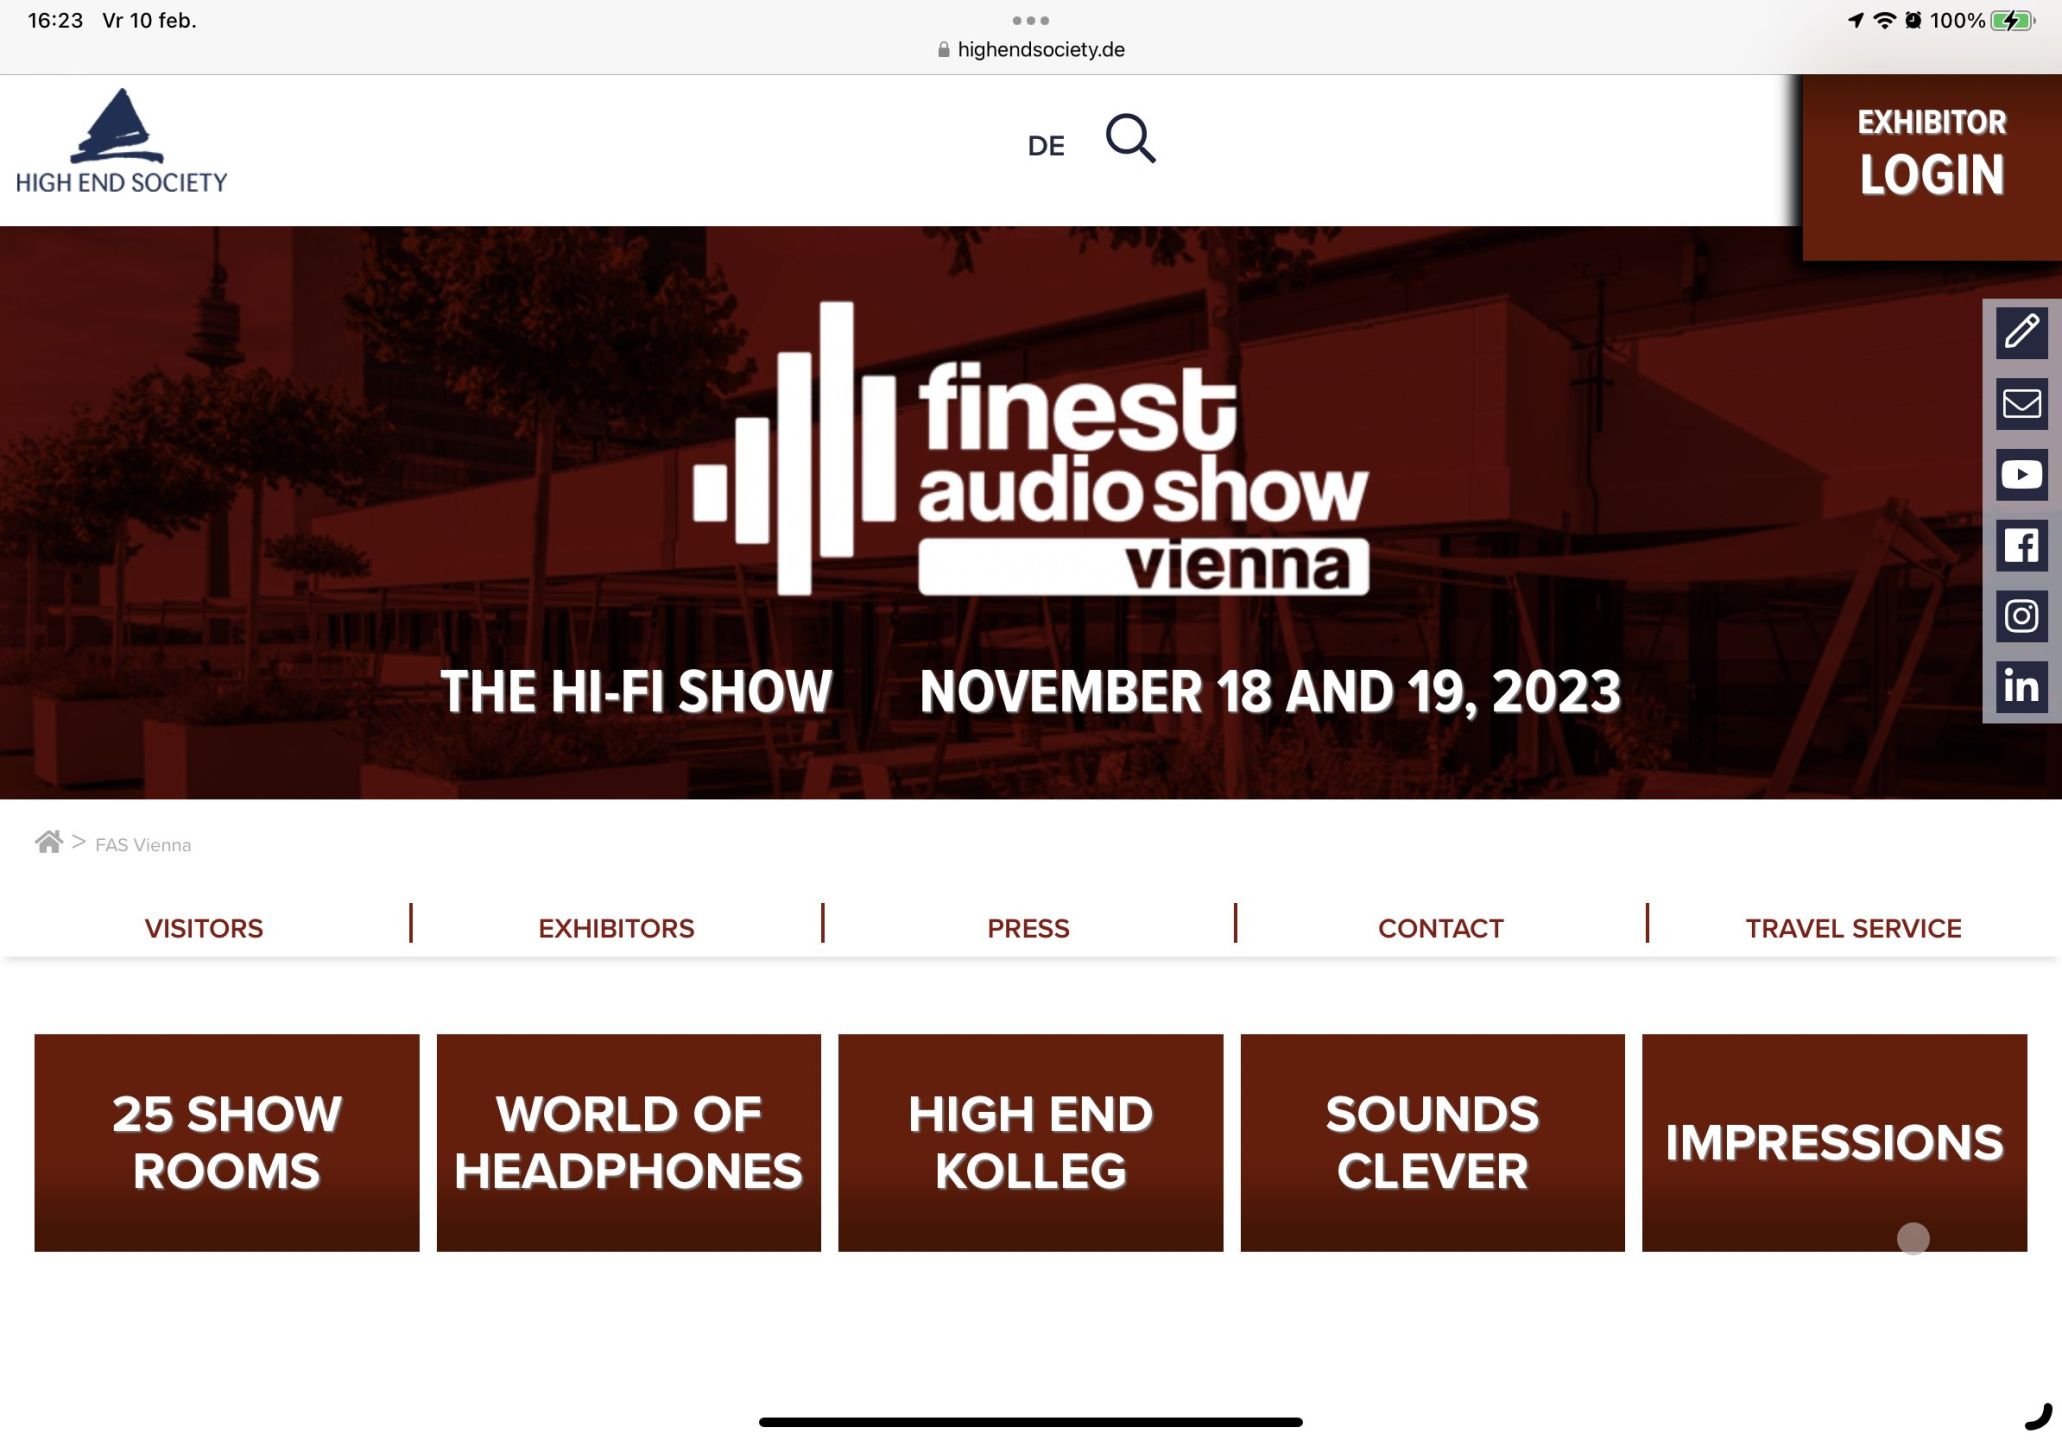 High End Society Finest Audio Show in Wenen 